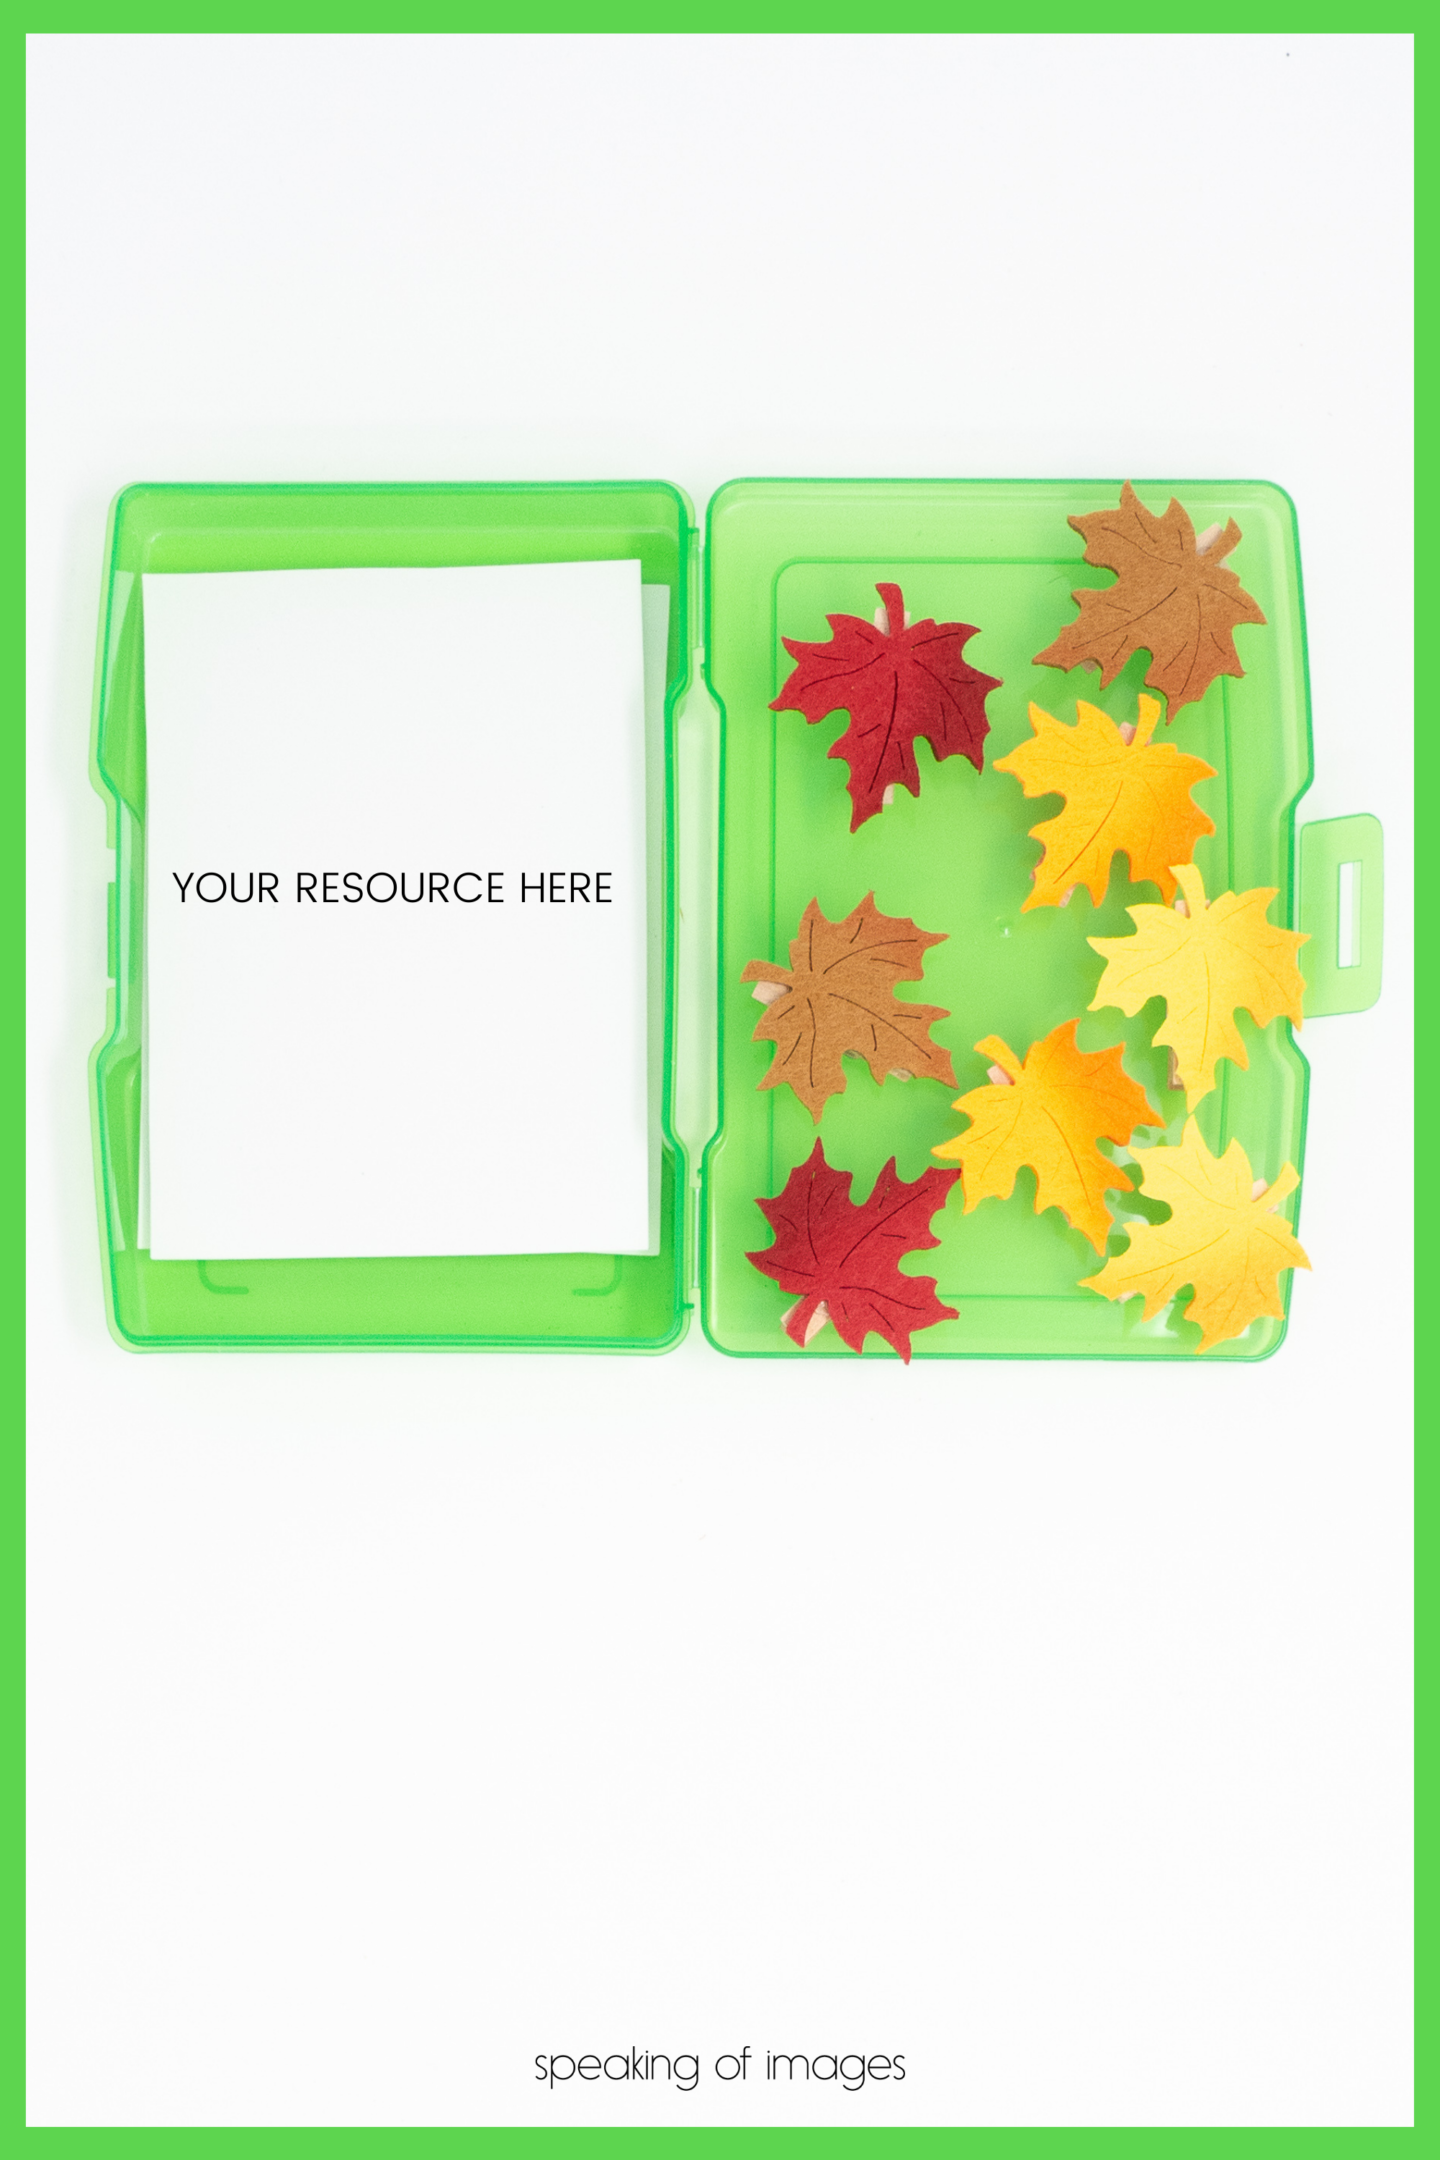 This task card resource includes white space for text to be added